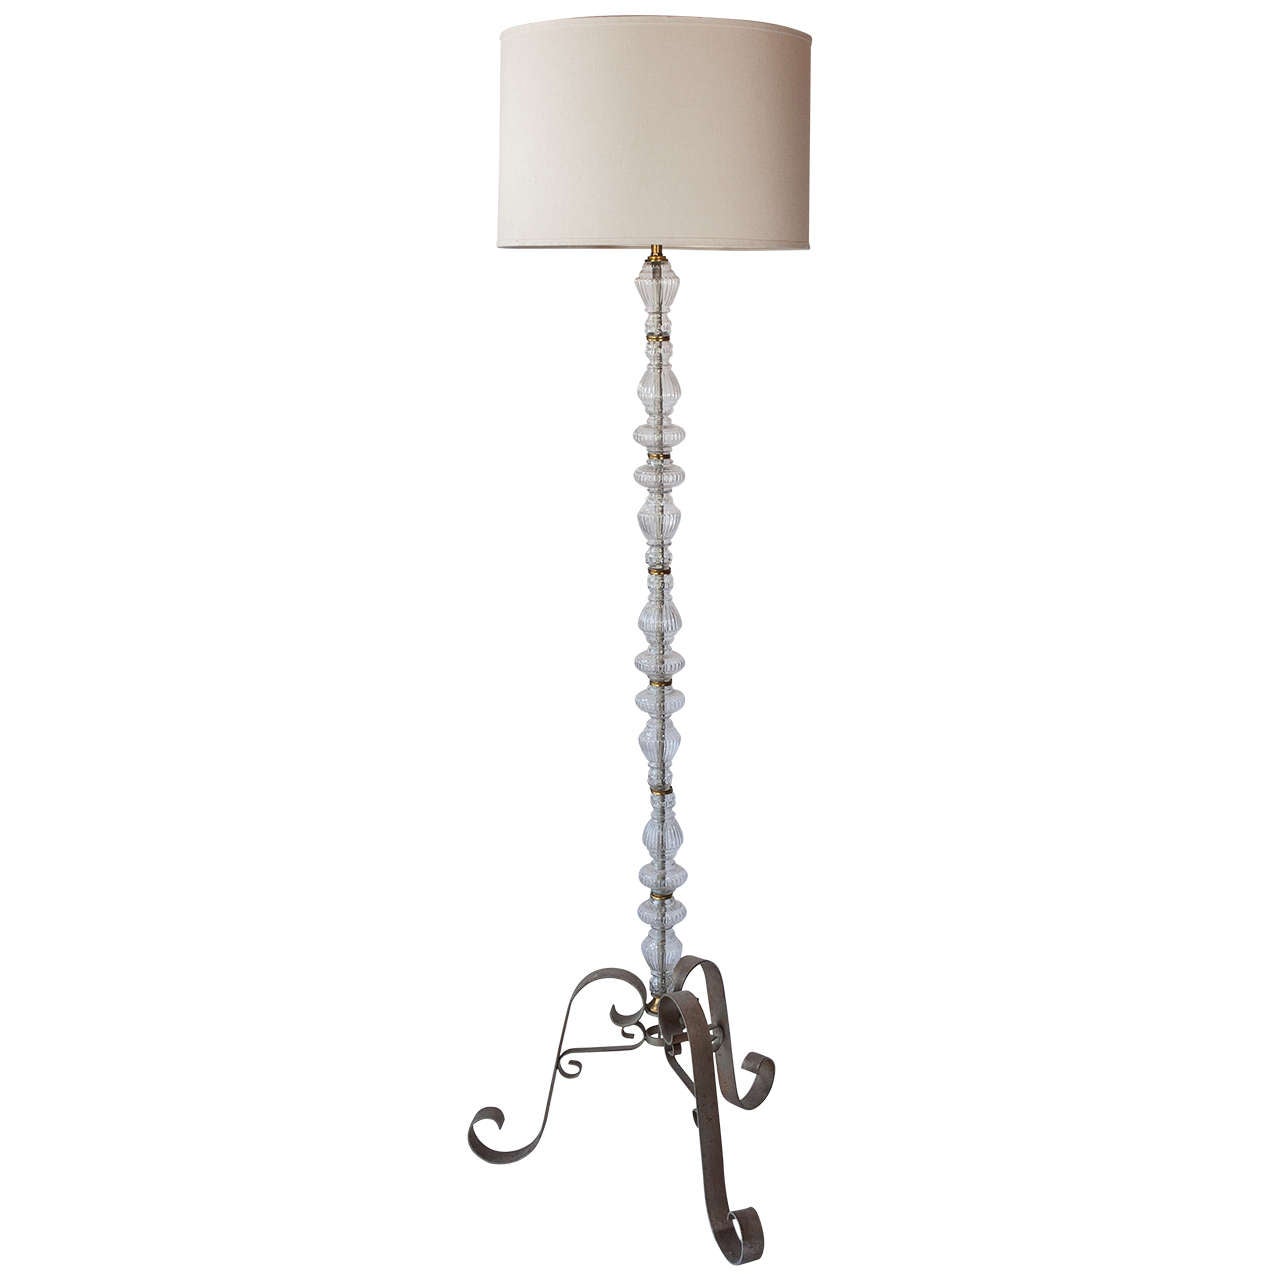 20th Century French Bubble Glass Floor lamp with linen shade c. 1940 Paris For Sale